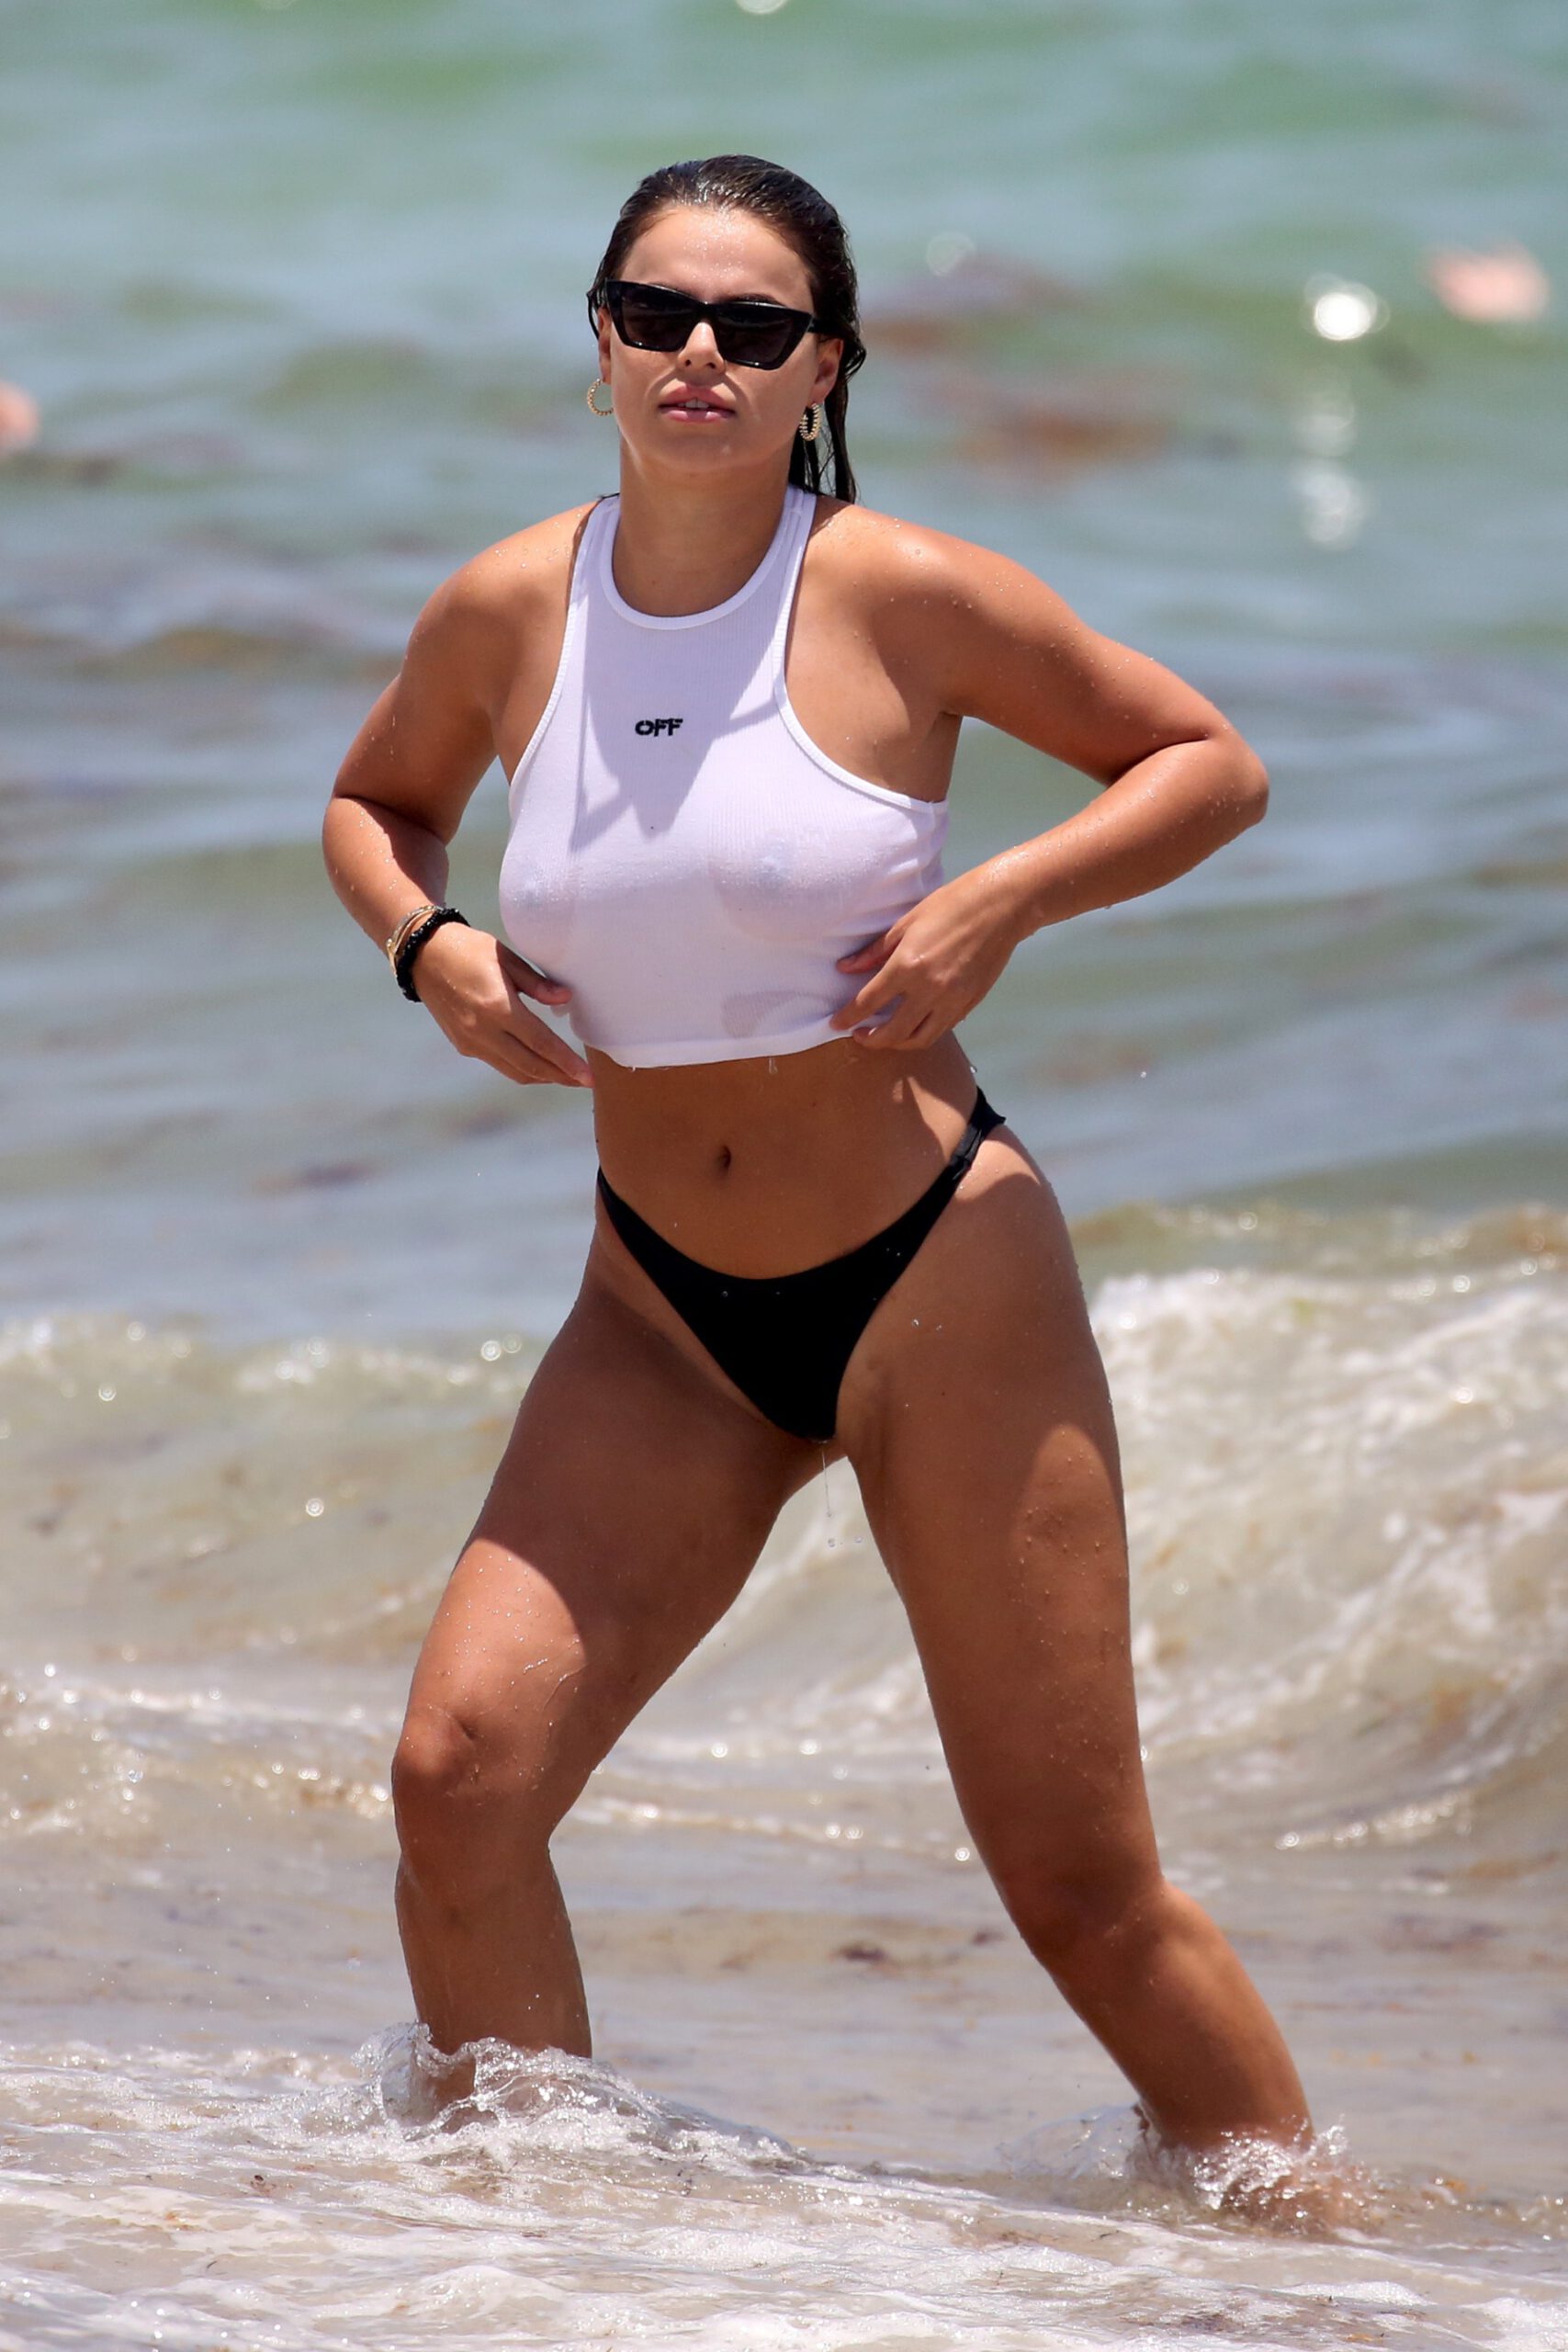 Brooks Nader’s Sexy Boobs and Nipples in Wet T-Shirt on a Beach in Miami. 